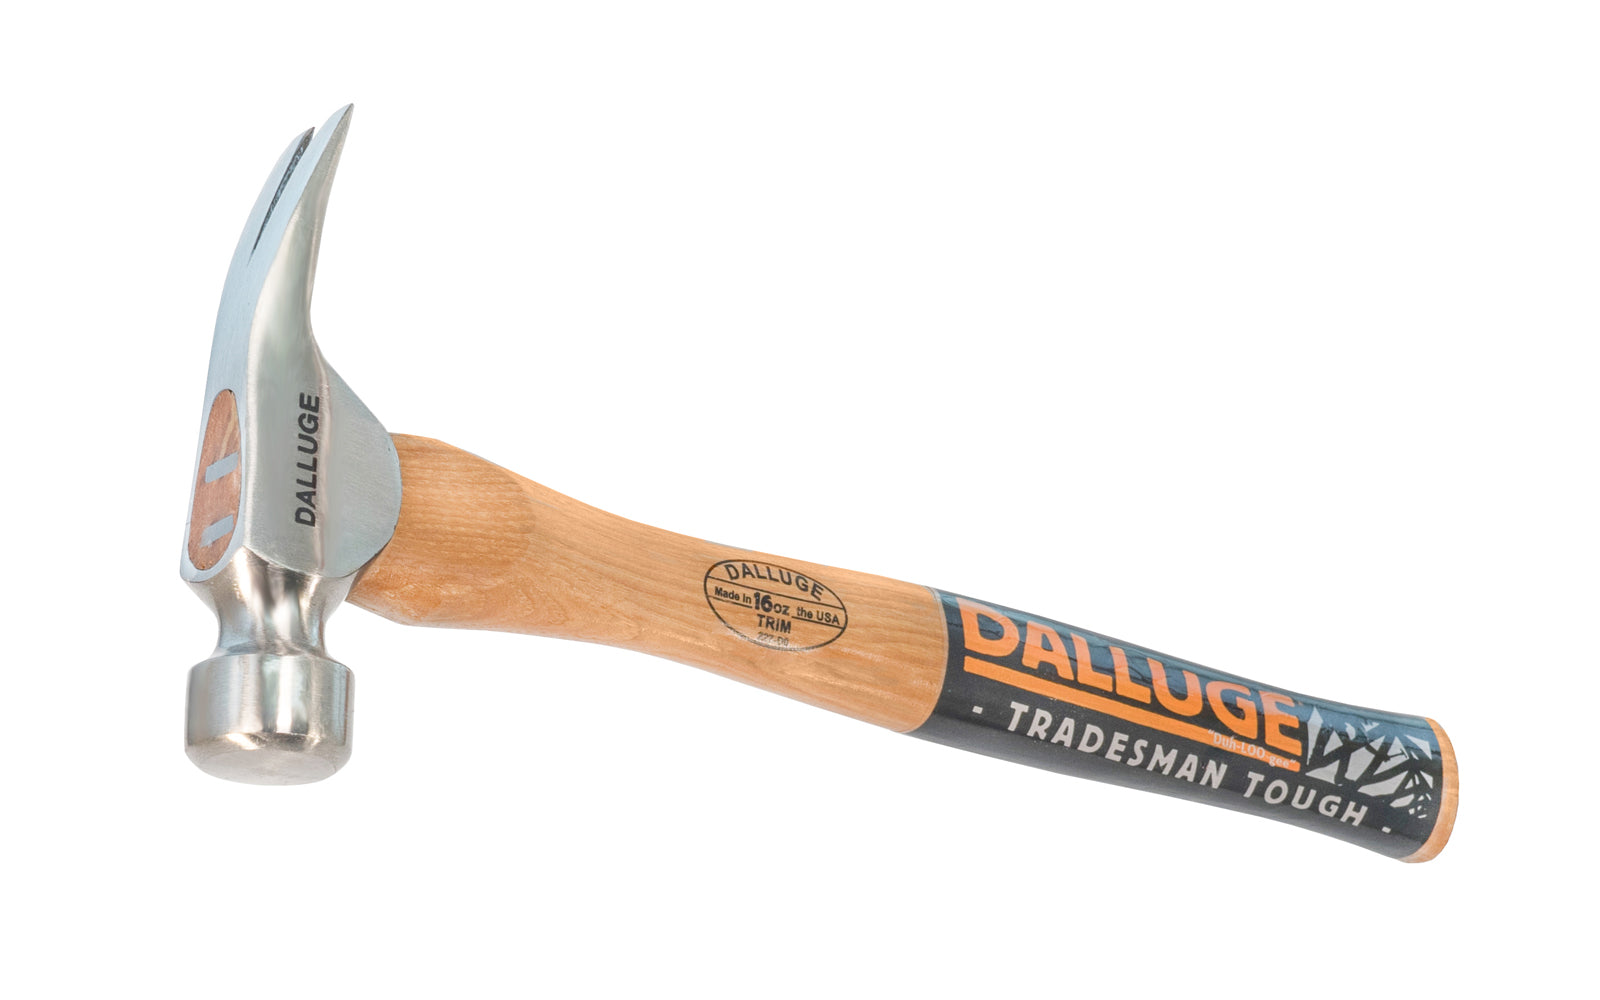 This 16 oz Dalluge Trim Hammer has a smooth face with a polished head. Straight Hickory hardwood handle. Model 1600. 13-1/2